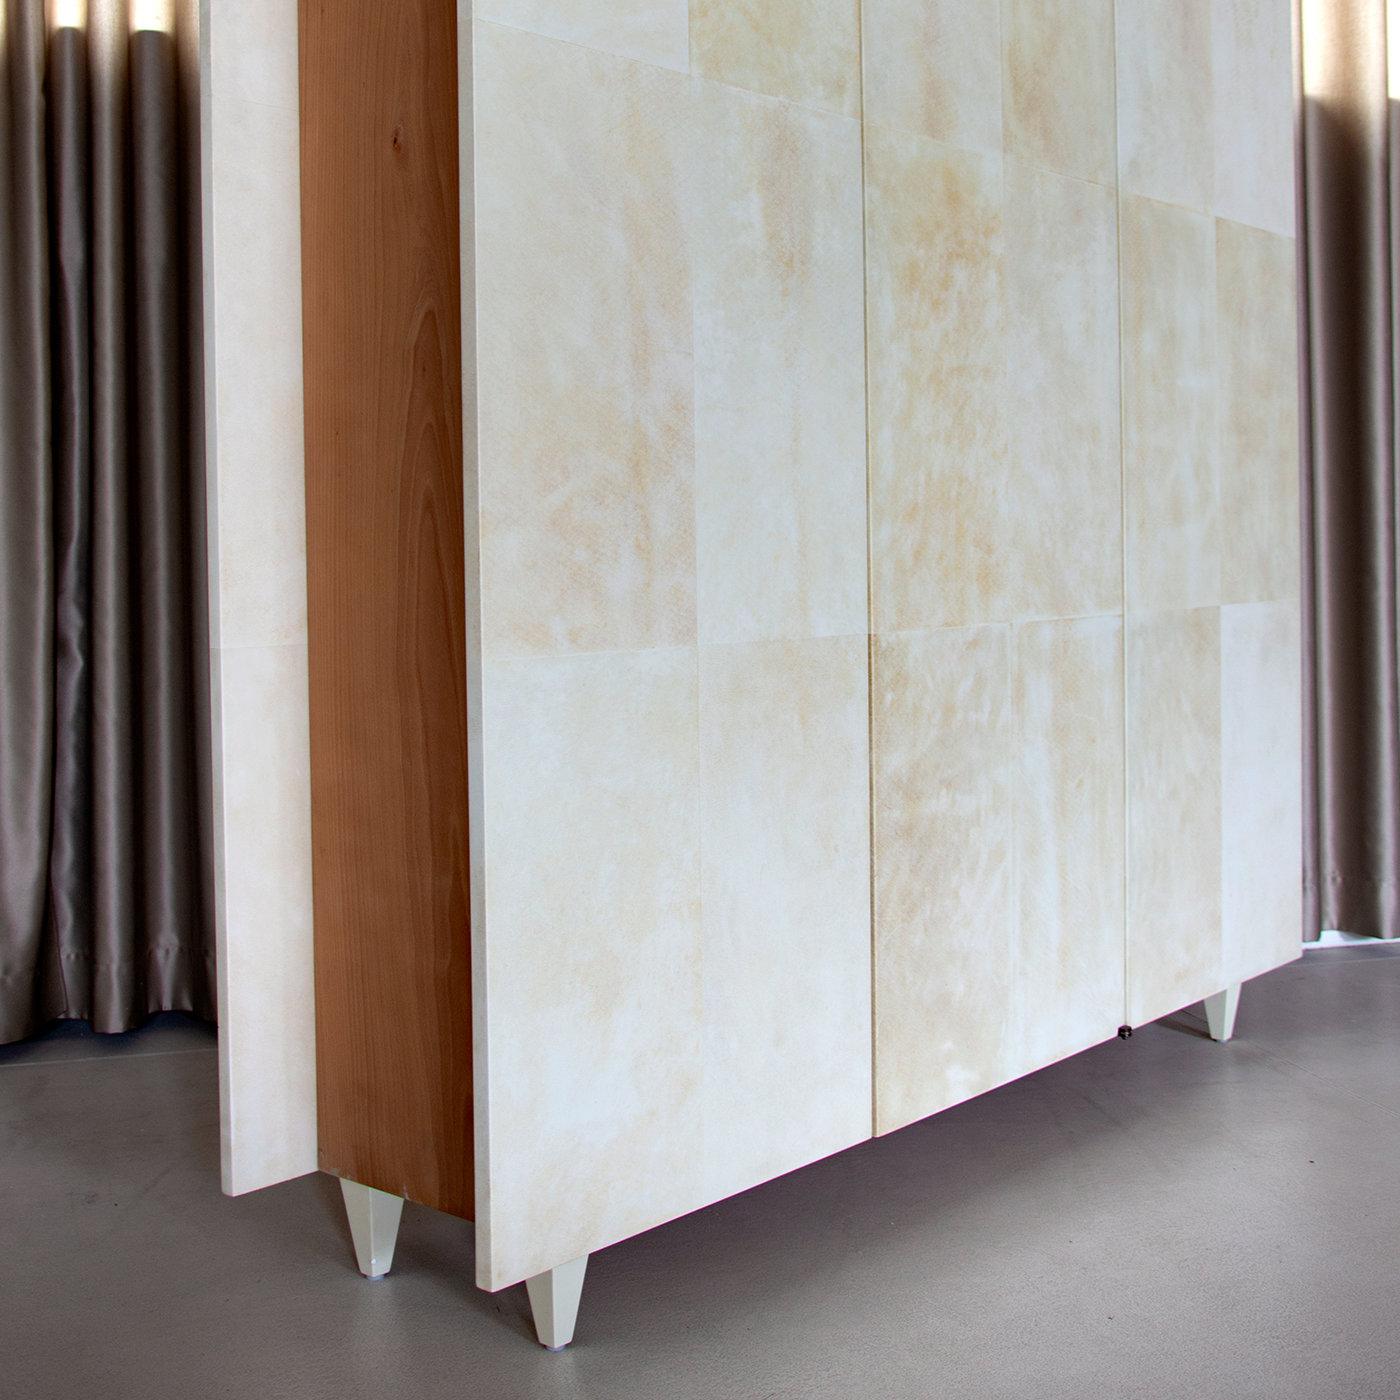 An exclusive design by Renzi e Reale, this wall unit cabinet is entirely wrapped in matte natural parchment and features three doors that open to reveal an interior in natural wood with three shelves in each section. The tall, rectangular structure